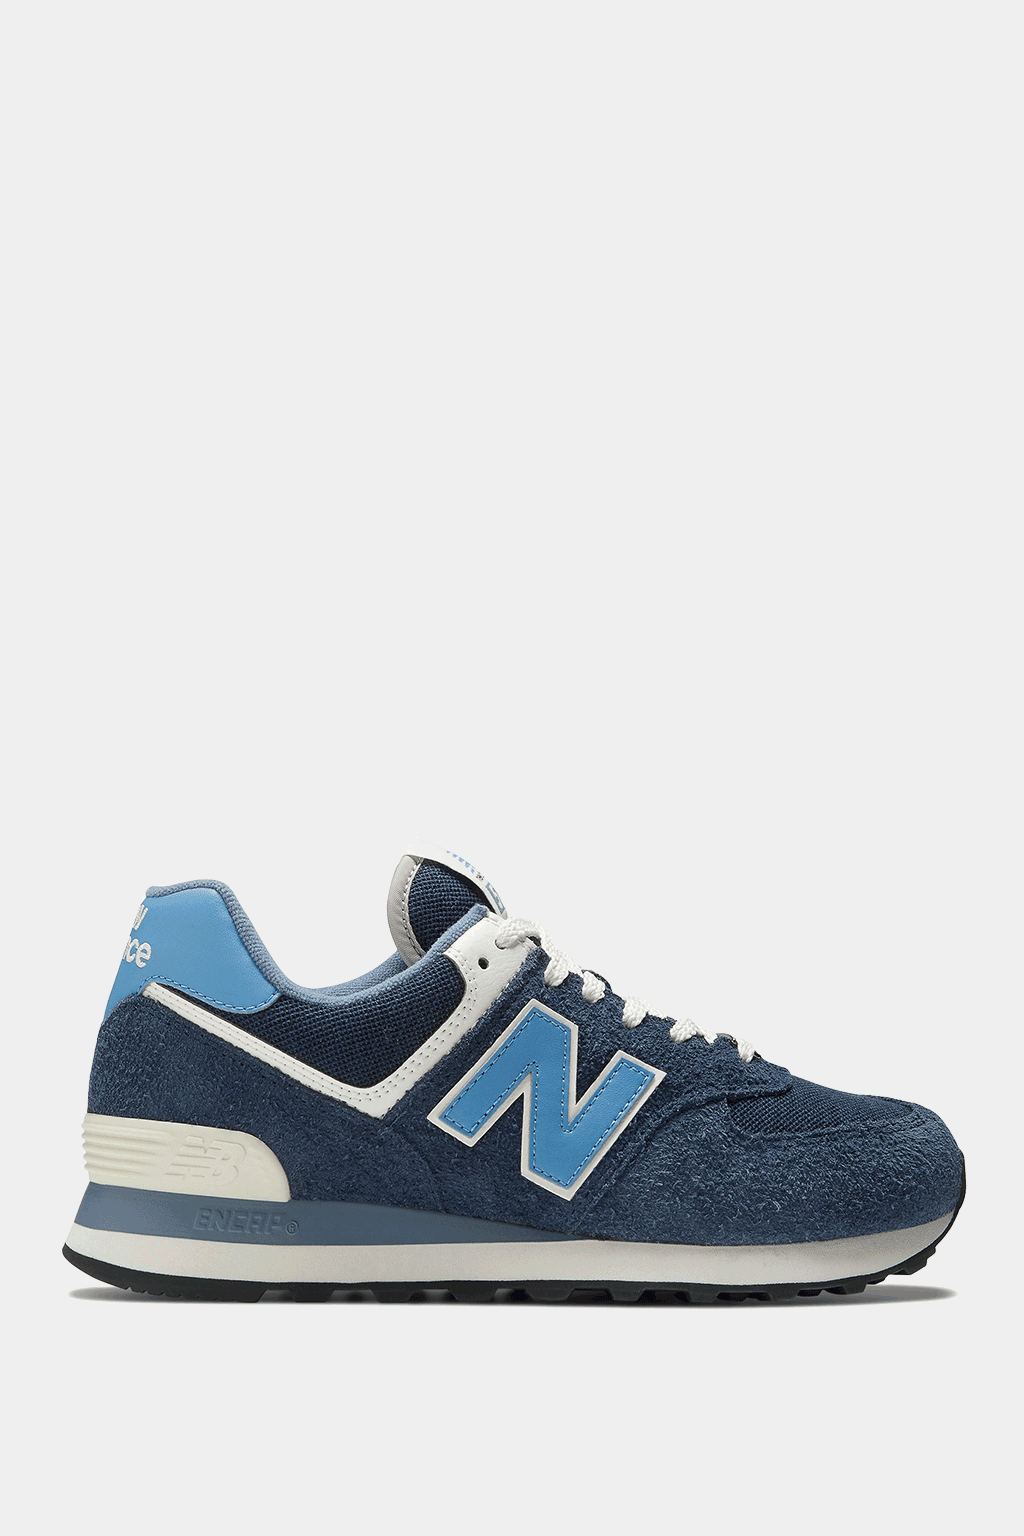 New Balance - 574 Unisex Sneakers Shoes